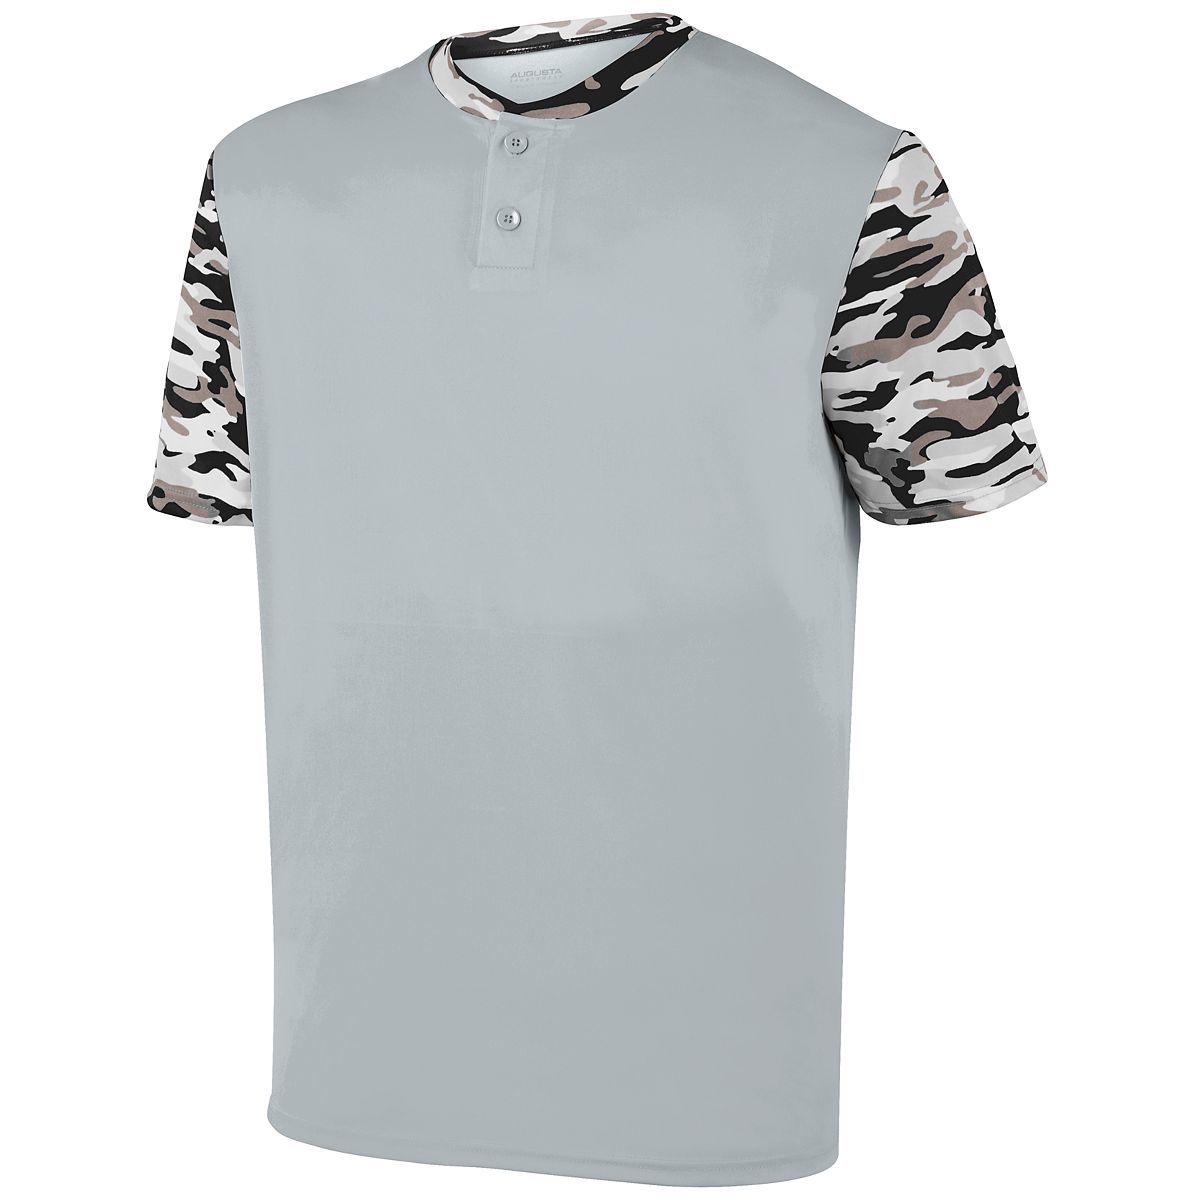 Augusta Sportswear Pop Fly Jersey in Silver/Black Mod  -Part of the Adult, Adult-Jersey, Augusta-Products, Baseball, Shirts, All-Sports, All-Sports-1 product lines at KanaleyCreations.com